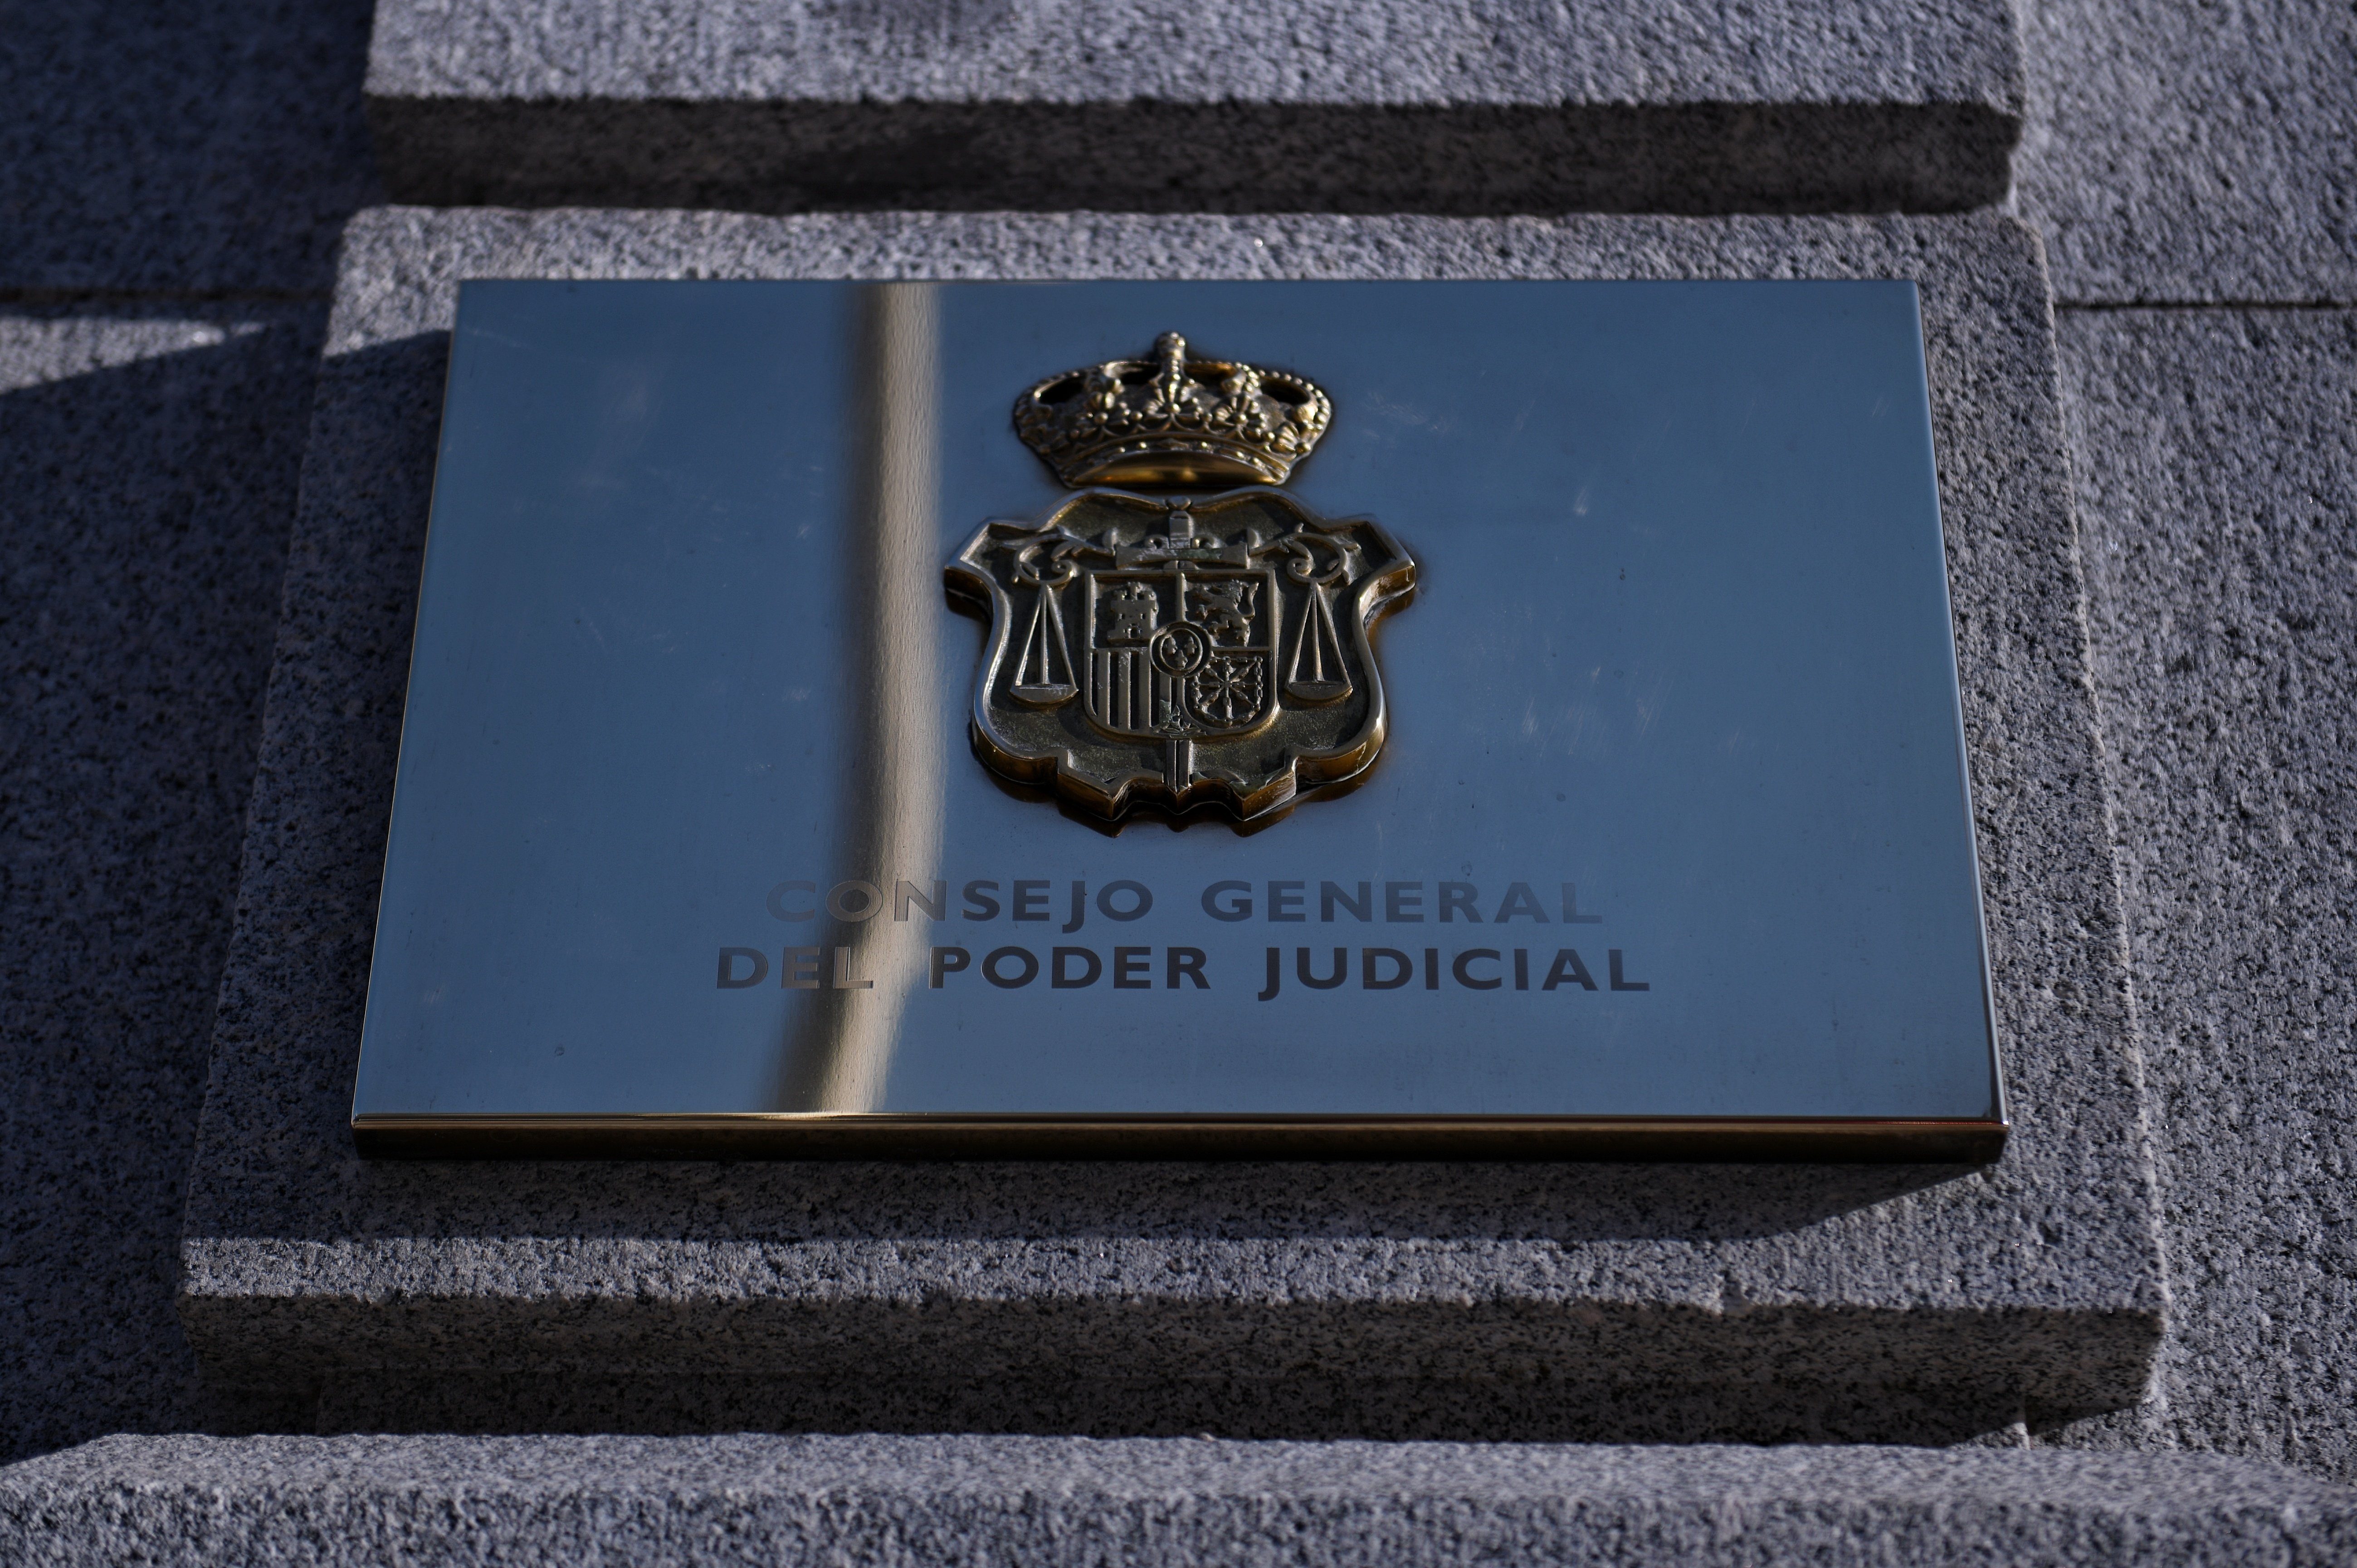 Tension in Spain's long-deadlocked judicial leadership after resignation of a judge